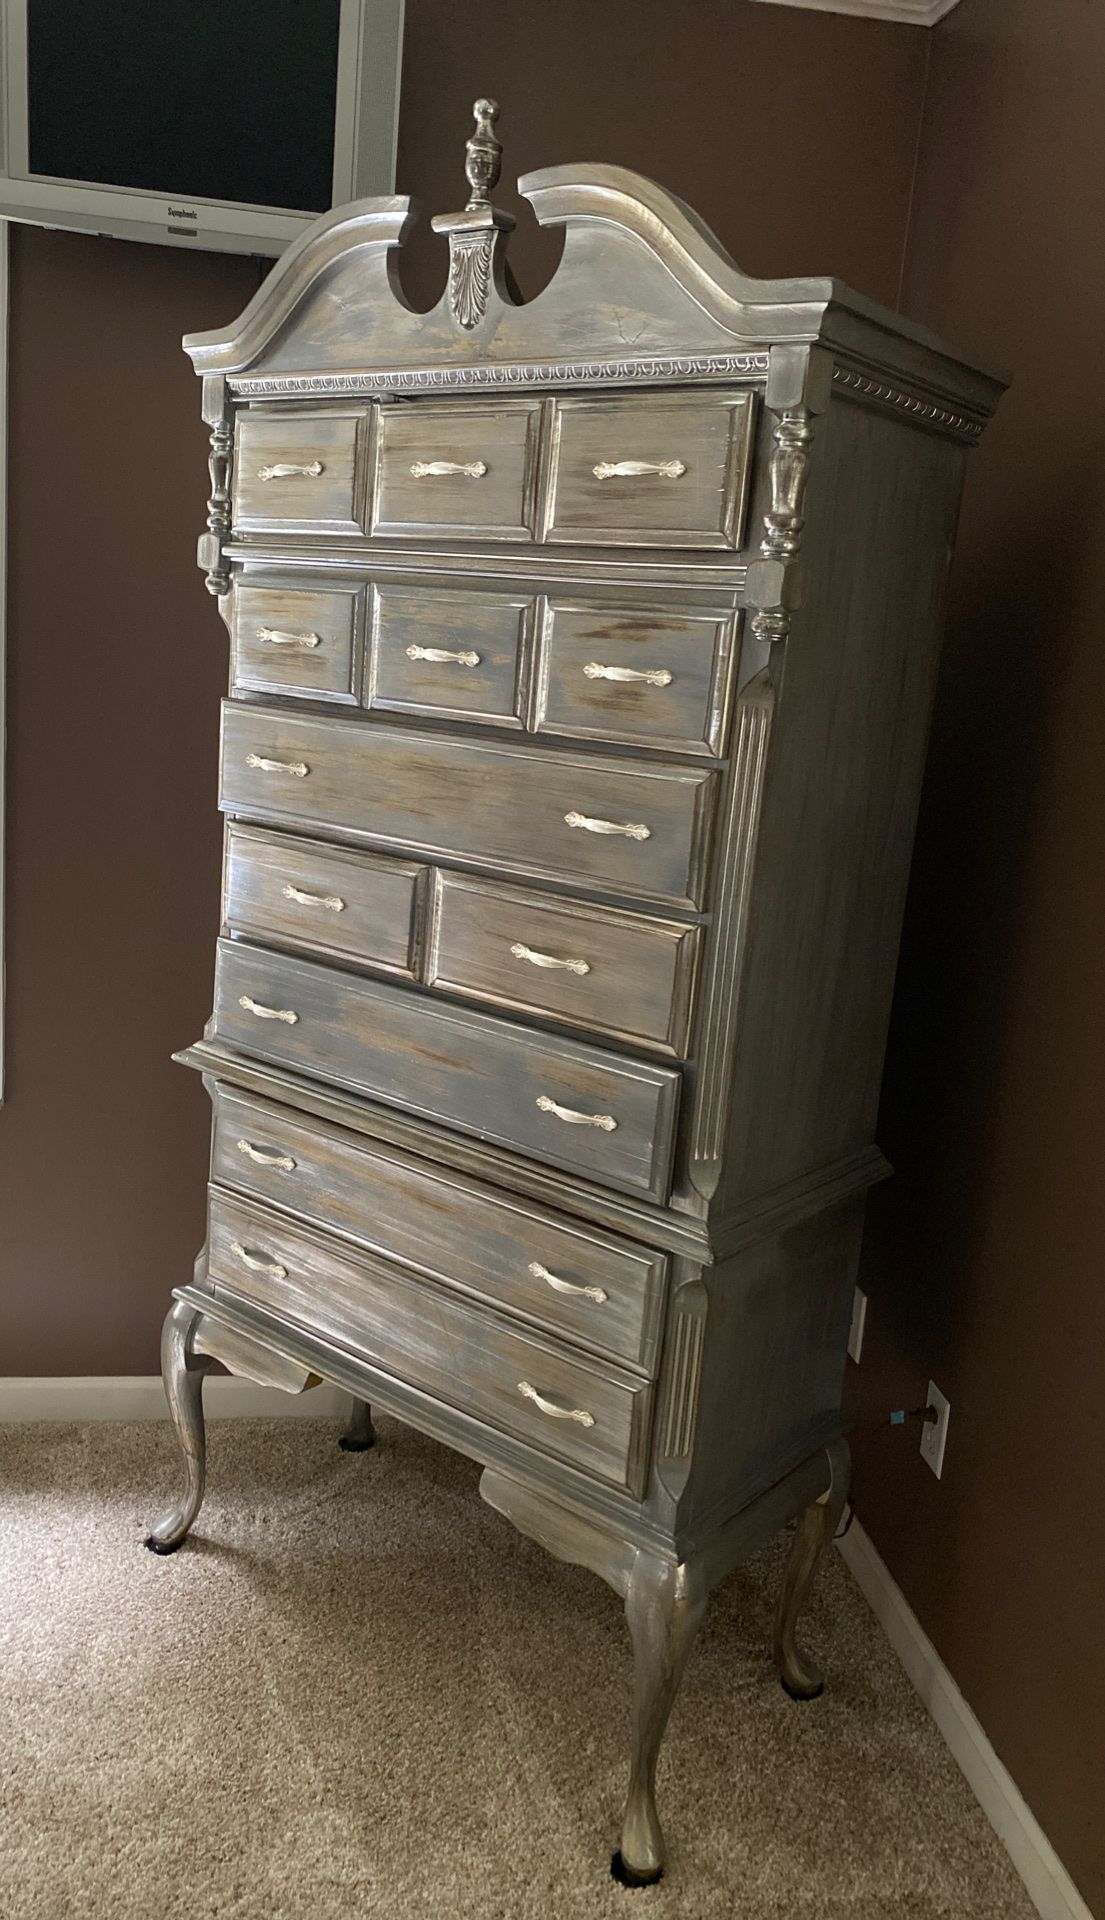 Nice Chest of drawers.